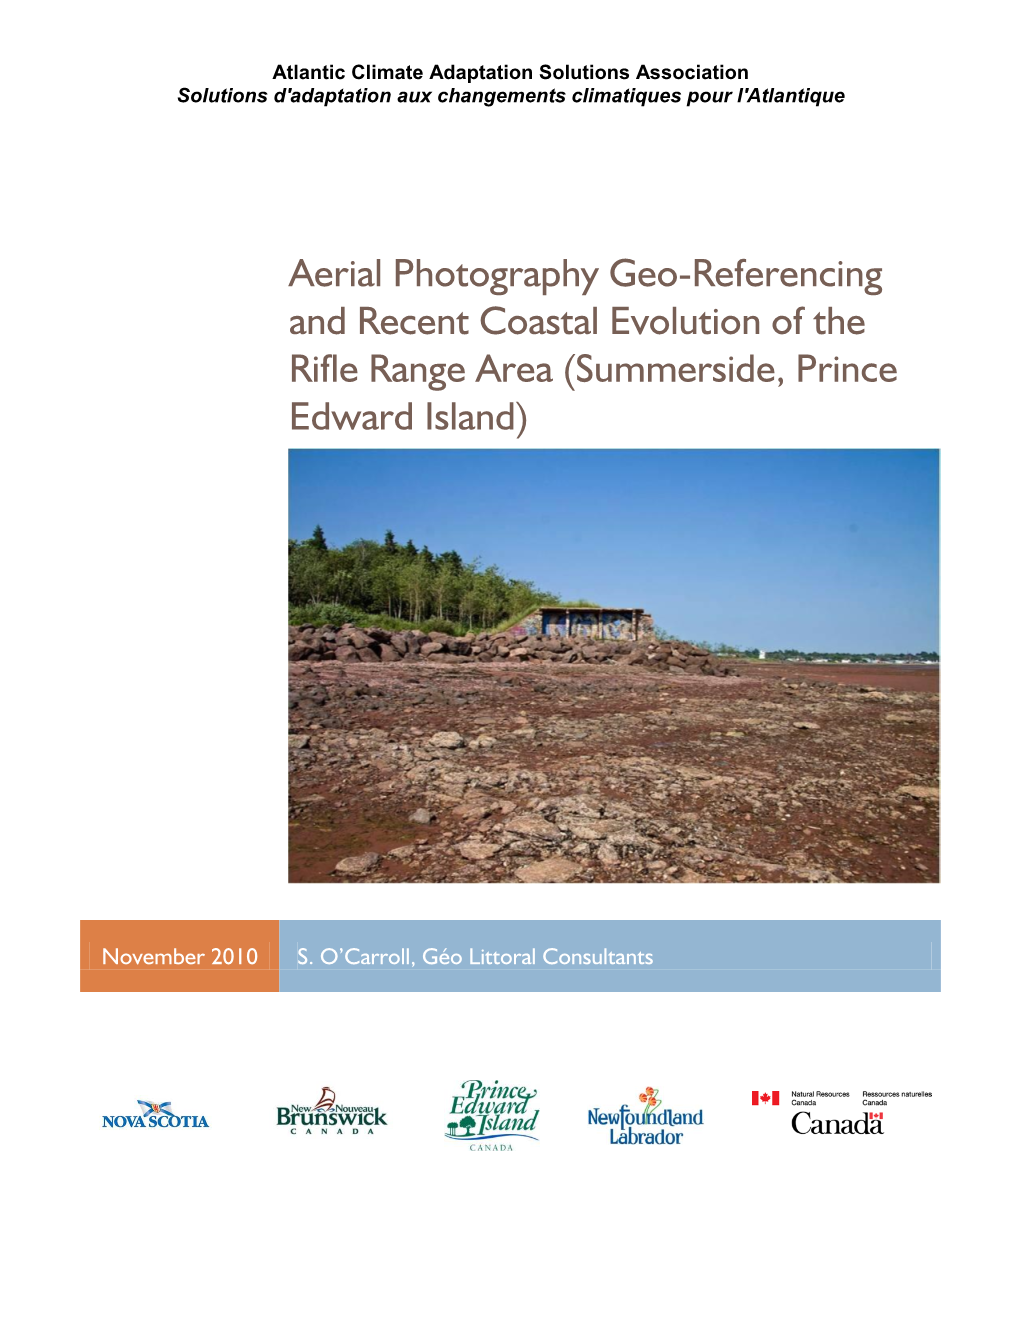 Aerial Photography Geo-Referencing and Recent Coastal Evolution of the Rifle Range Area (Summerside, Prince Edward Island)